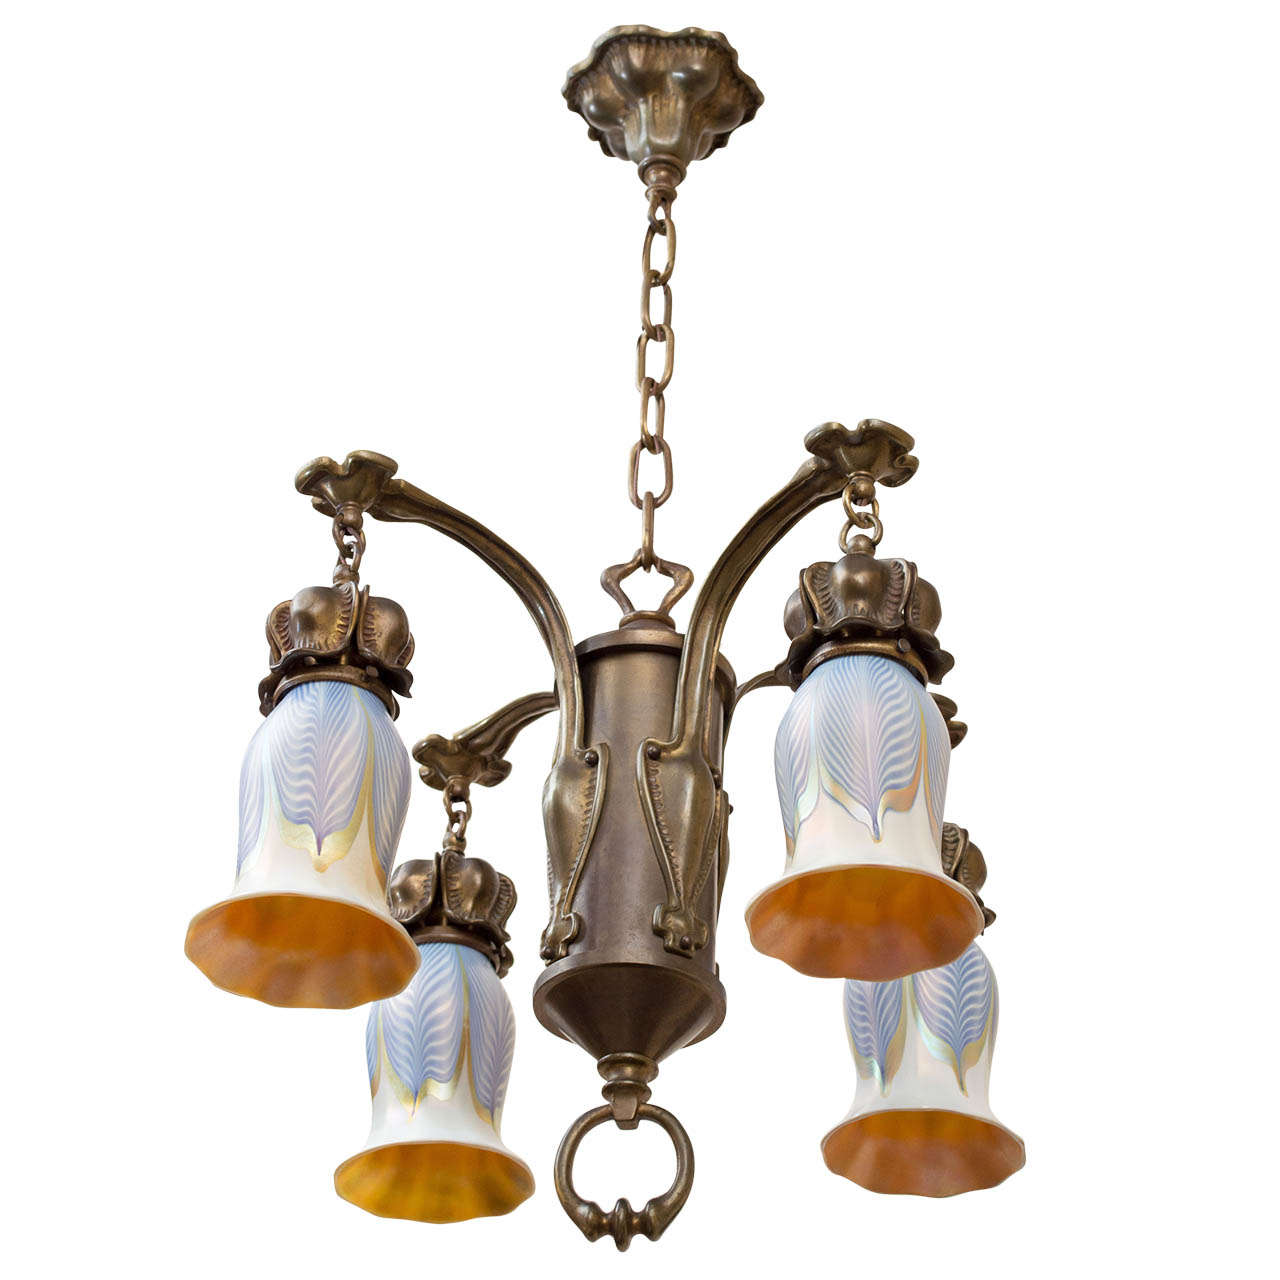 Art Nouveau Chandelier with Blue Pulled Feather Shades by Quezal